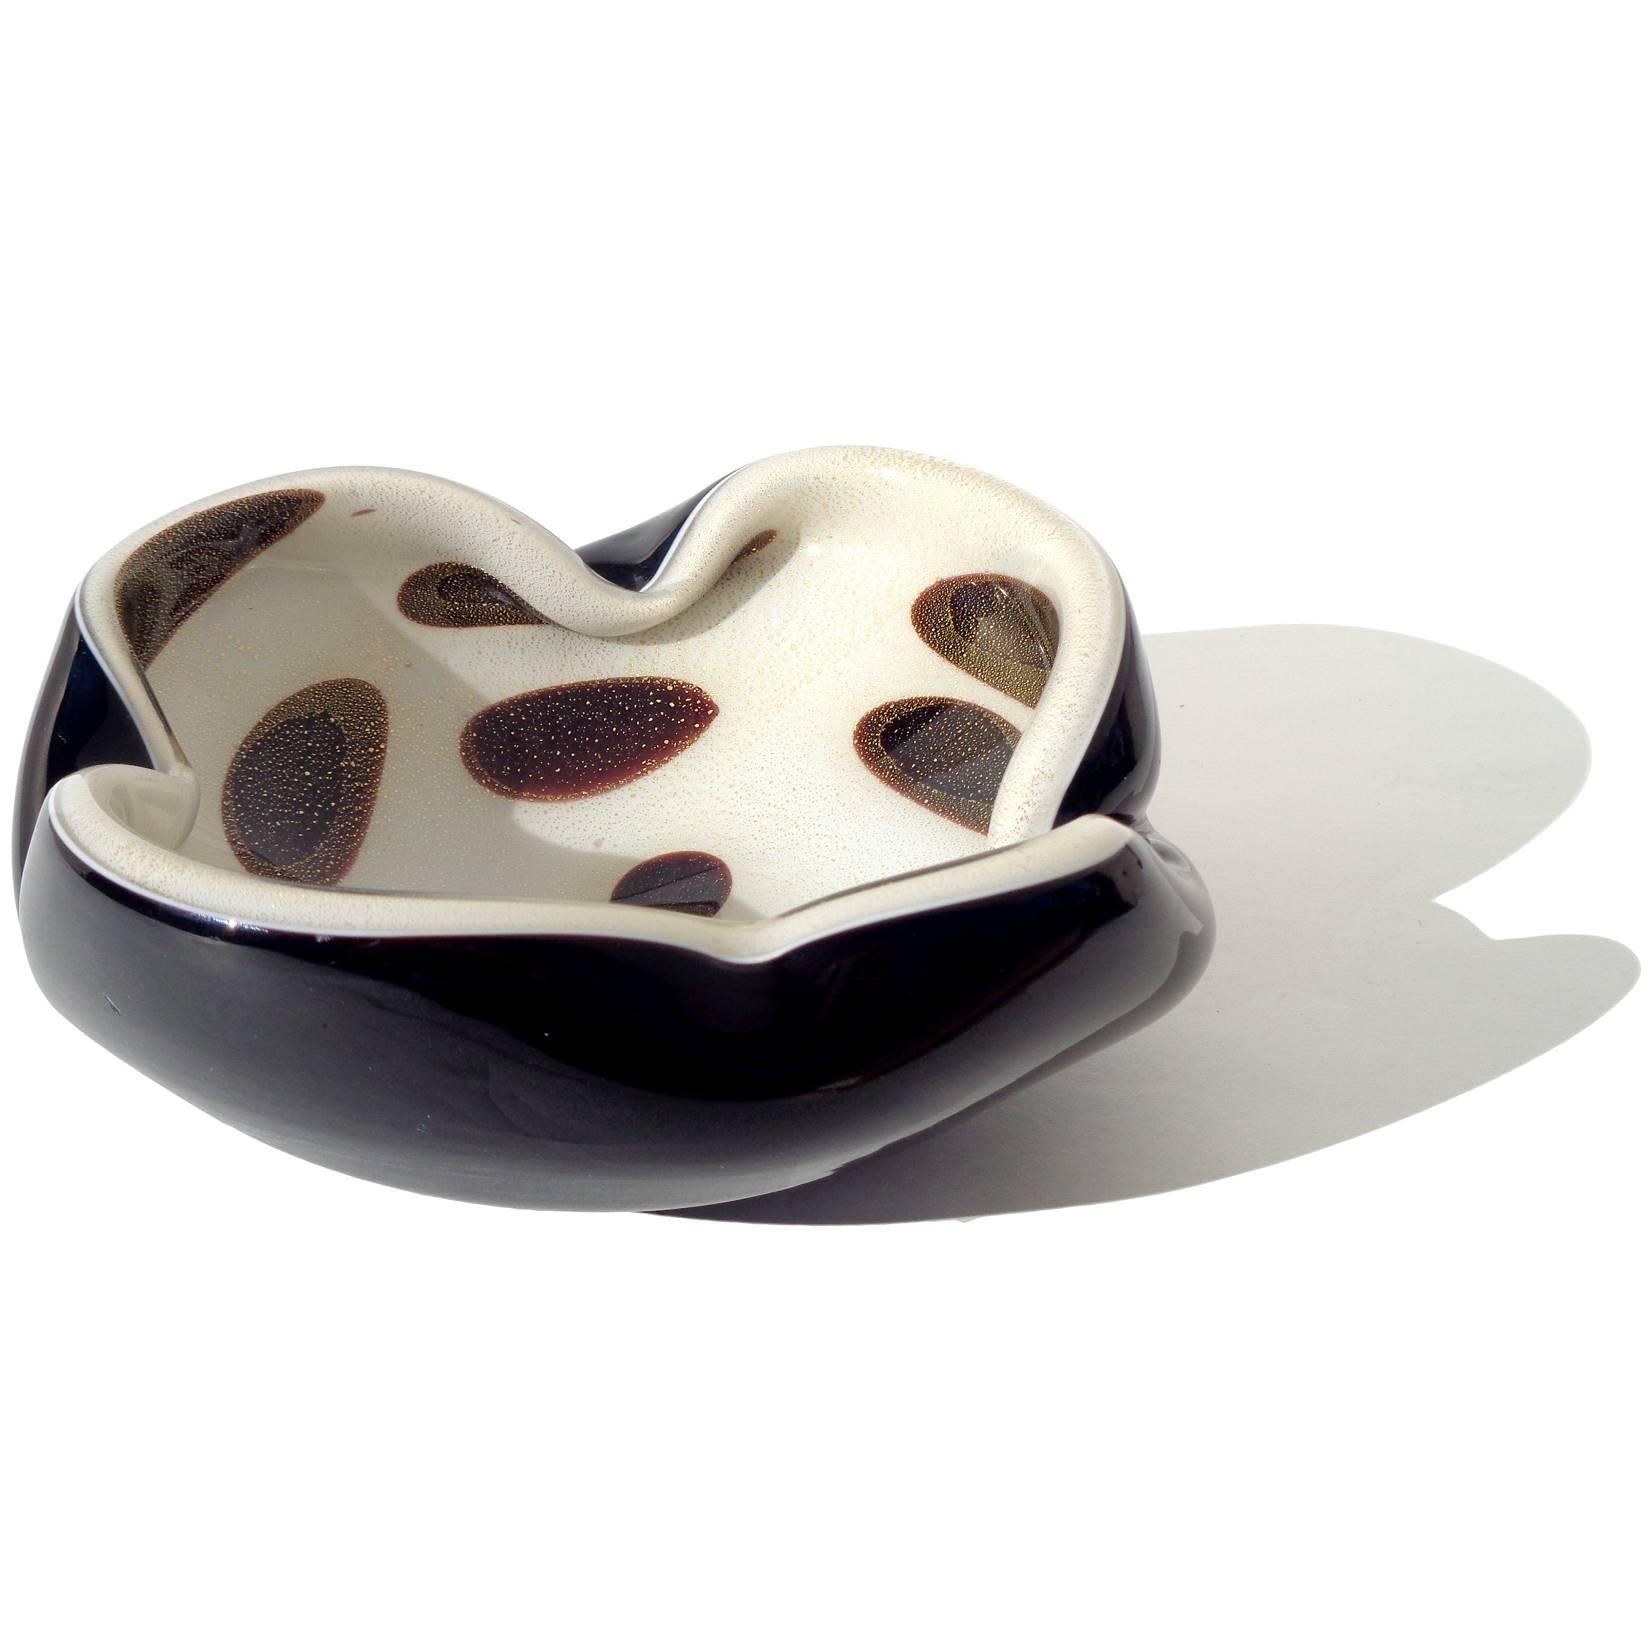 Beautiful vintage Murano hand blown black over white and gold flecks Italian art glass bowl with spots decoration. Documented to designer Alfredo Barbini. The bowl is profusely covered in gold leaf. Can be used as a display piece on any table. Use